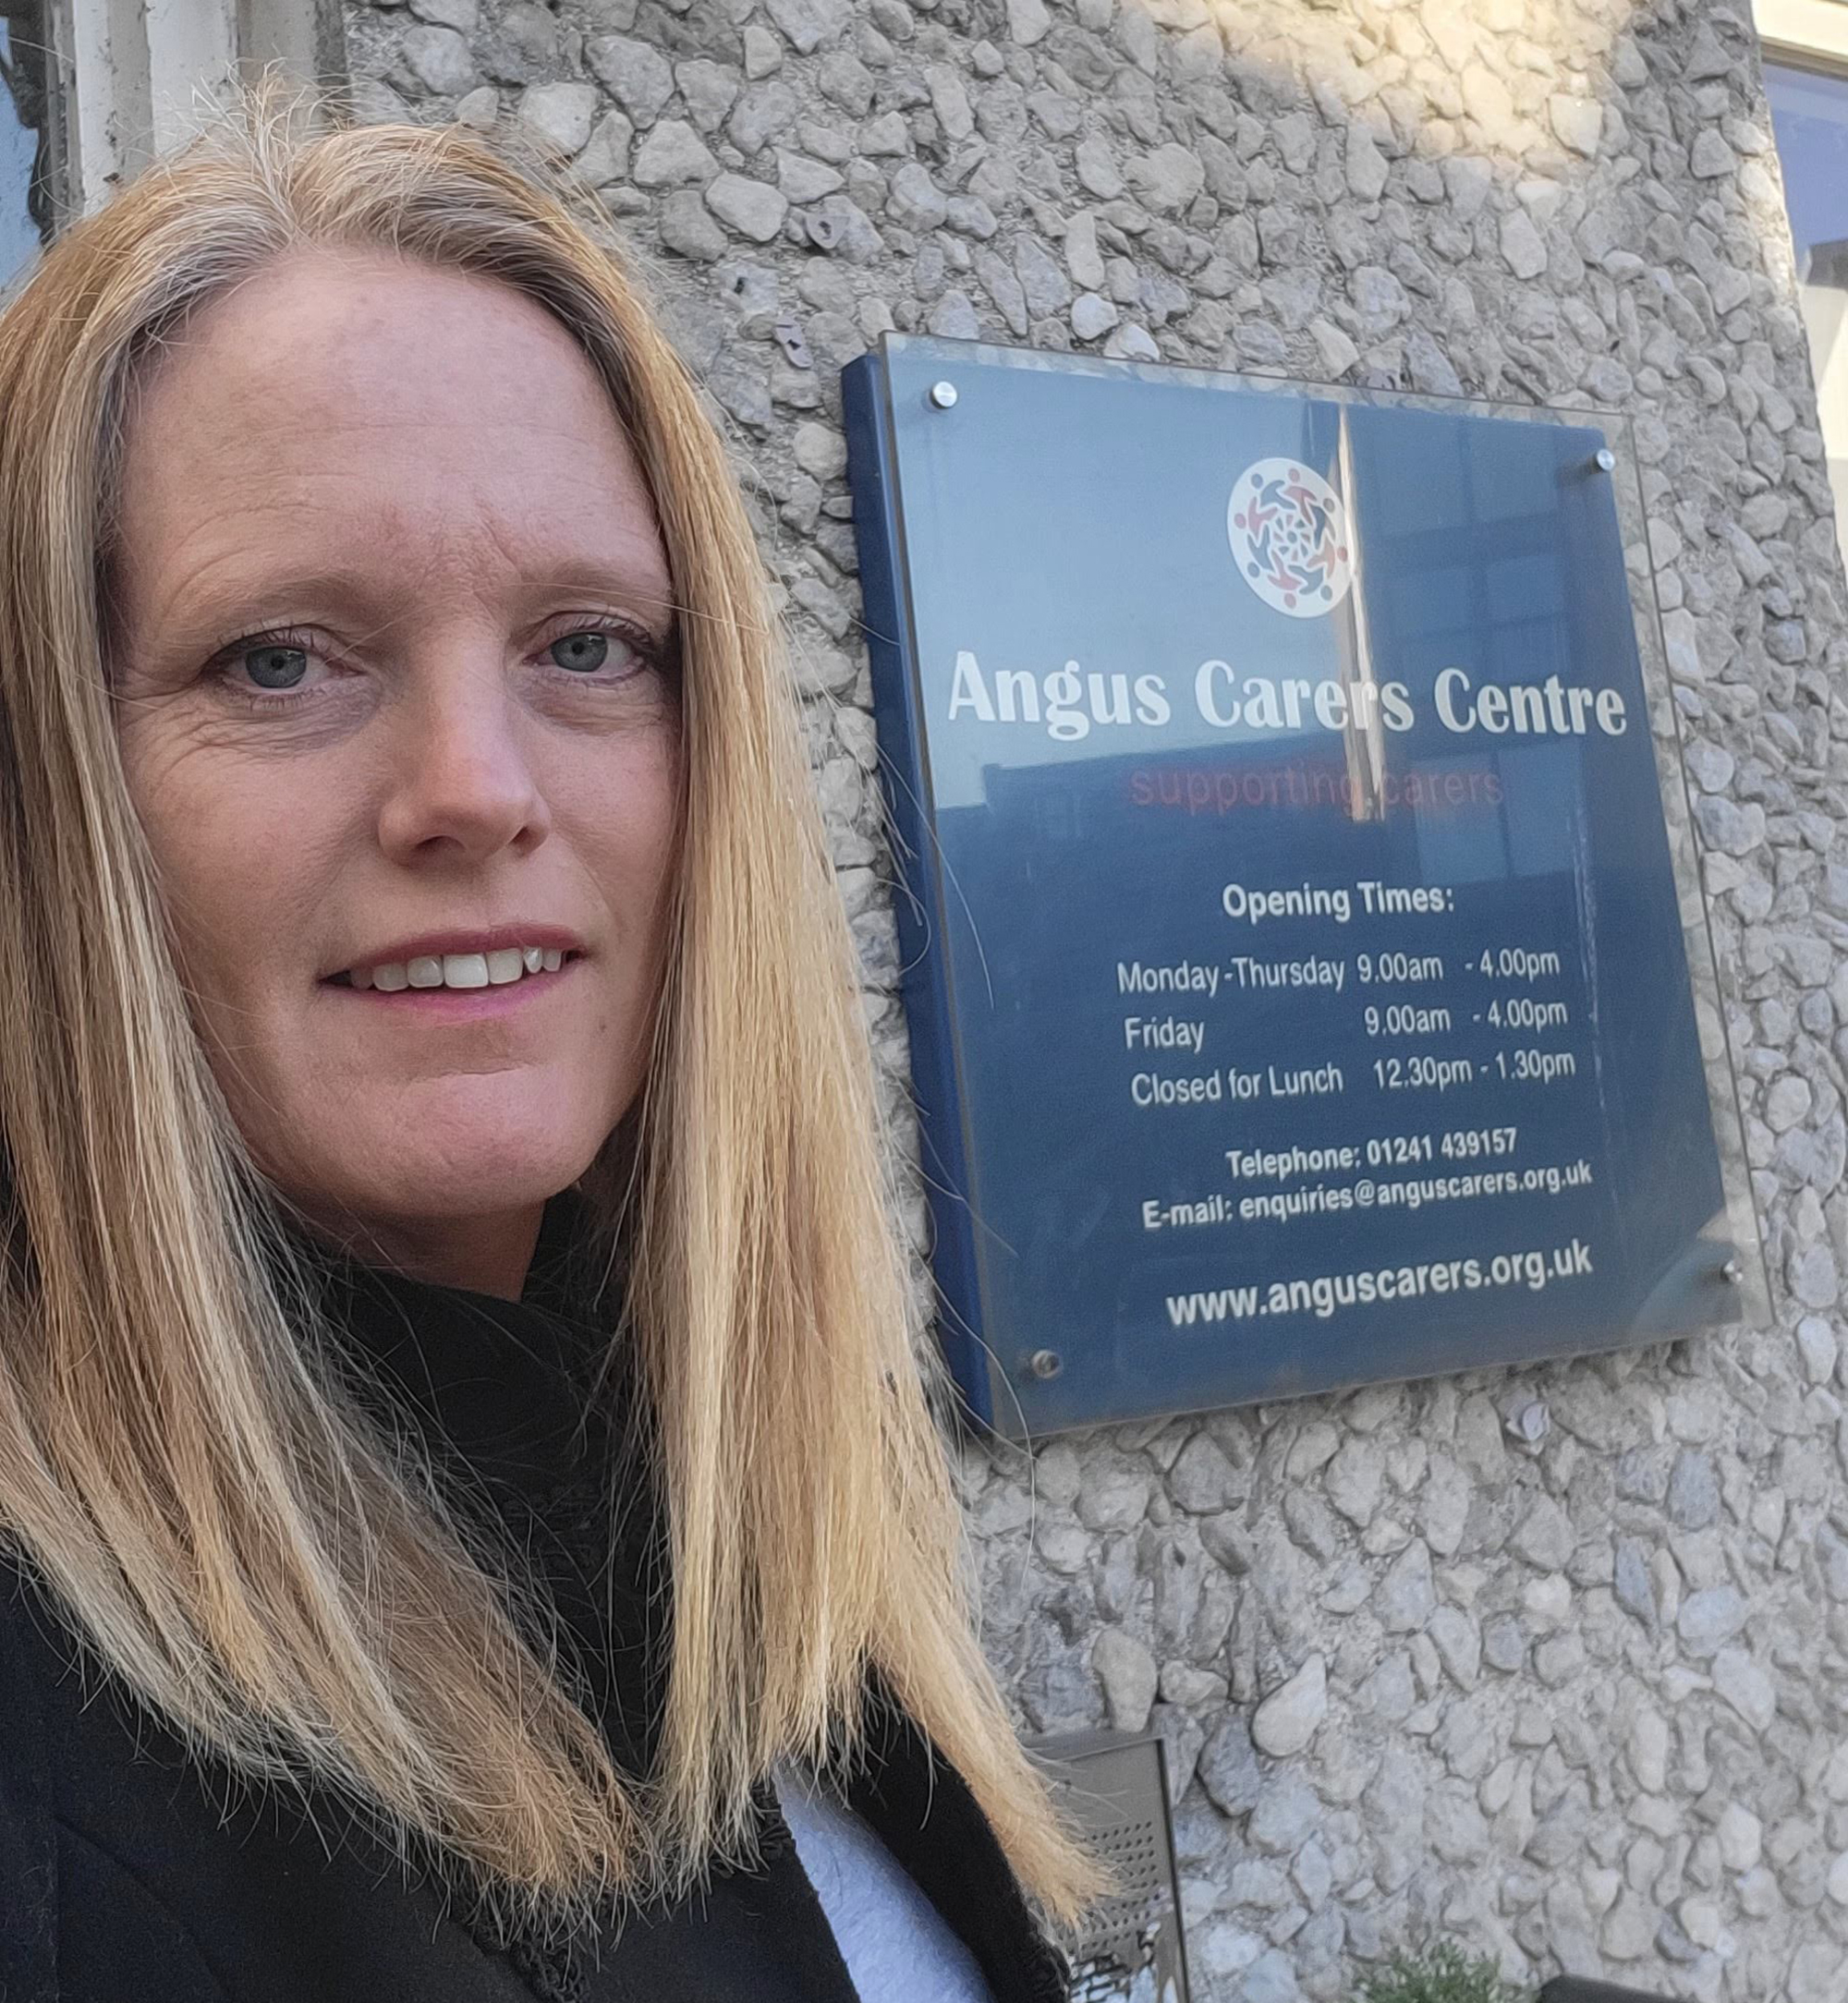 D&A member of staff Mel standing in front of Angus Carers Centre)